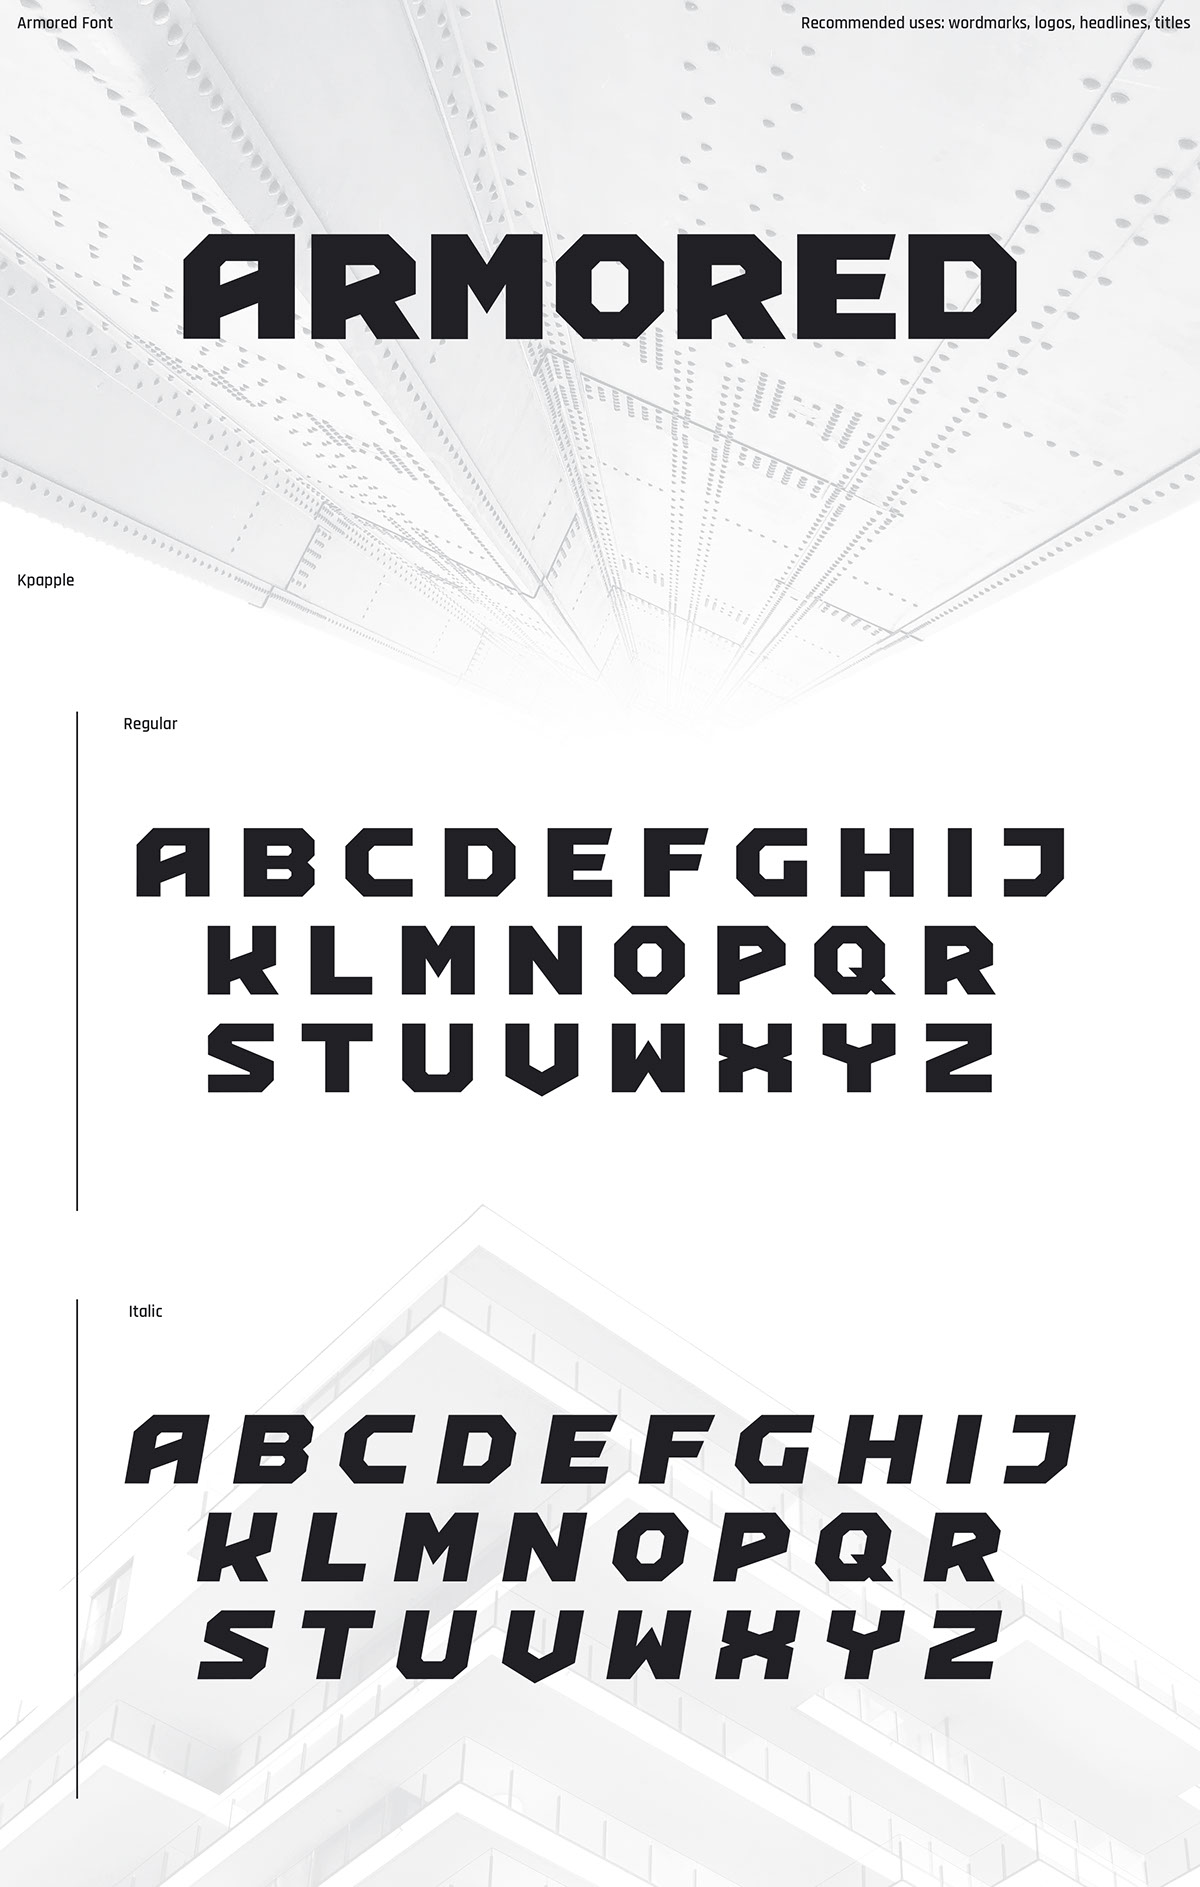 Armored Font rendition image